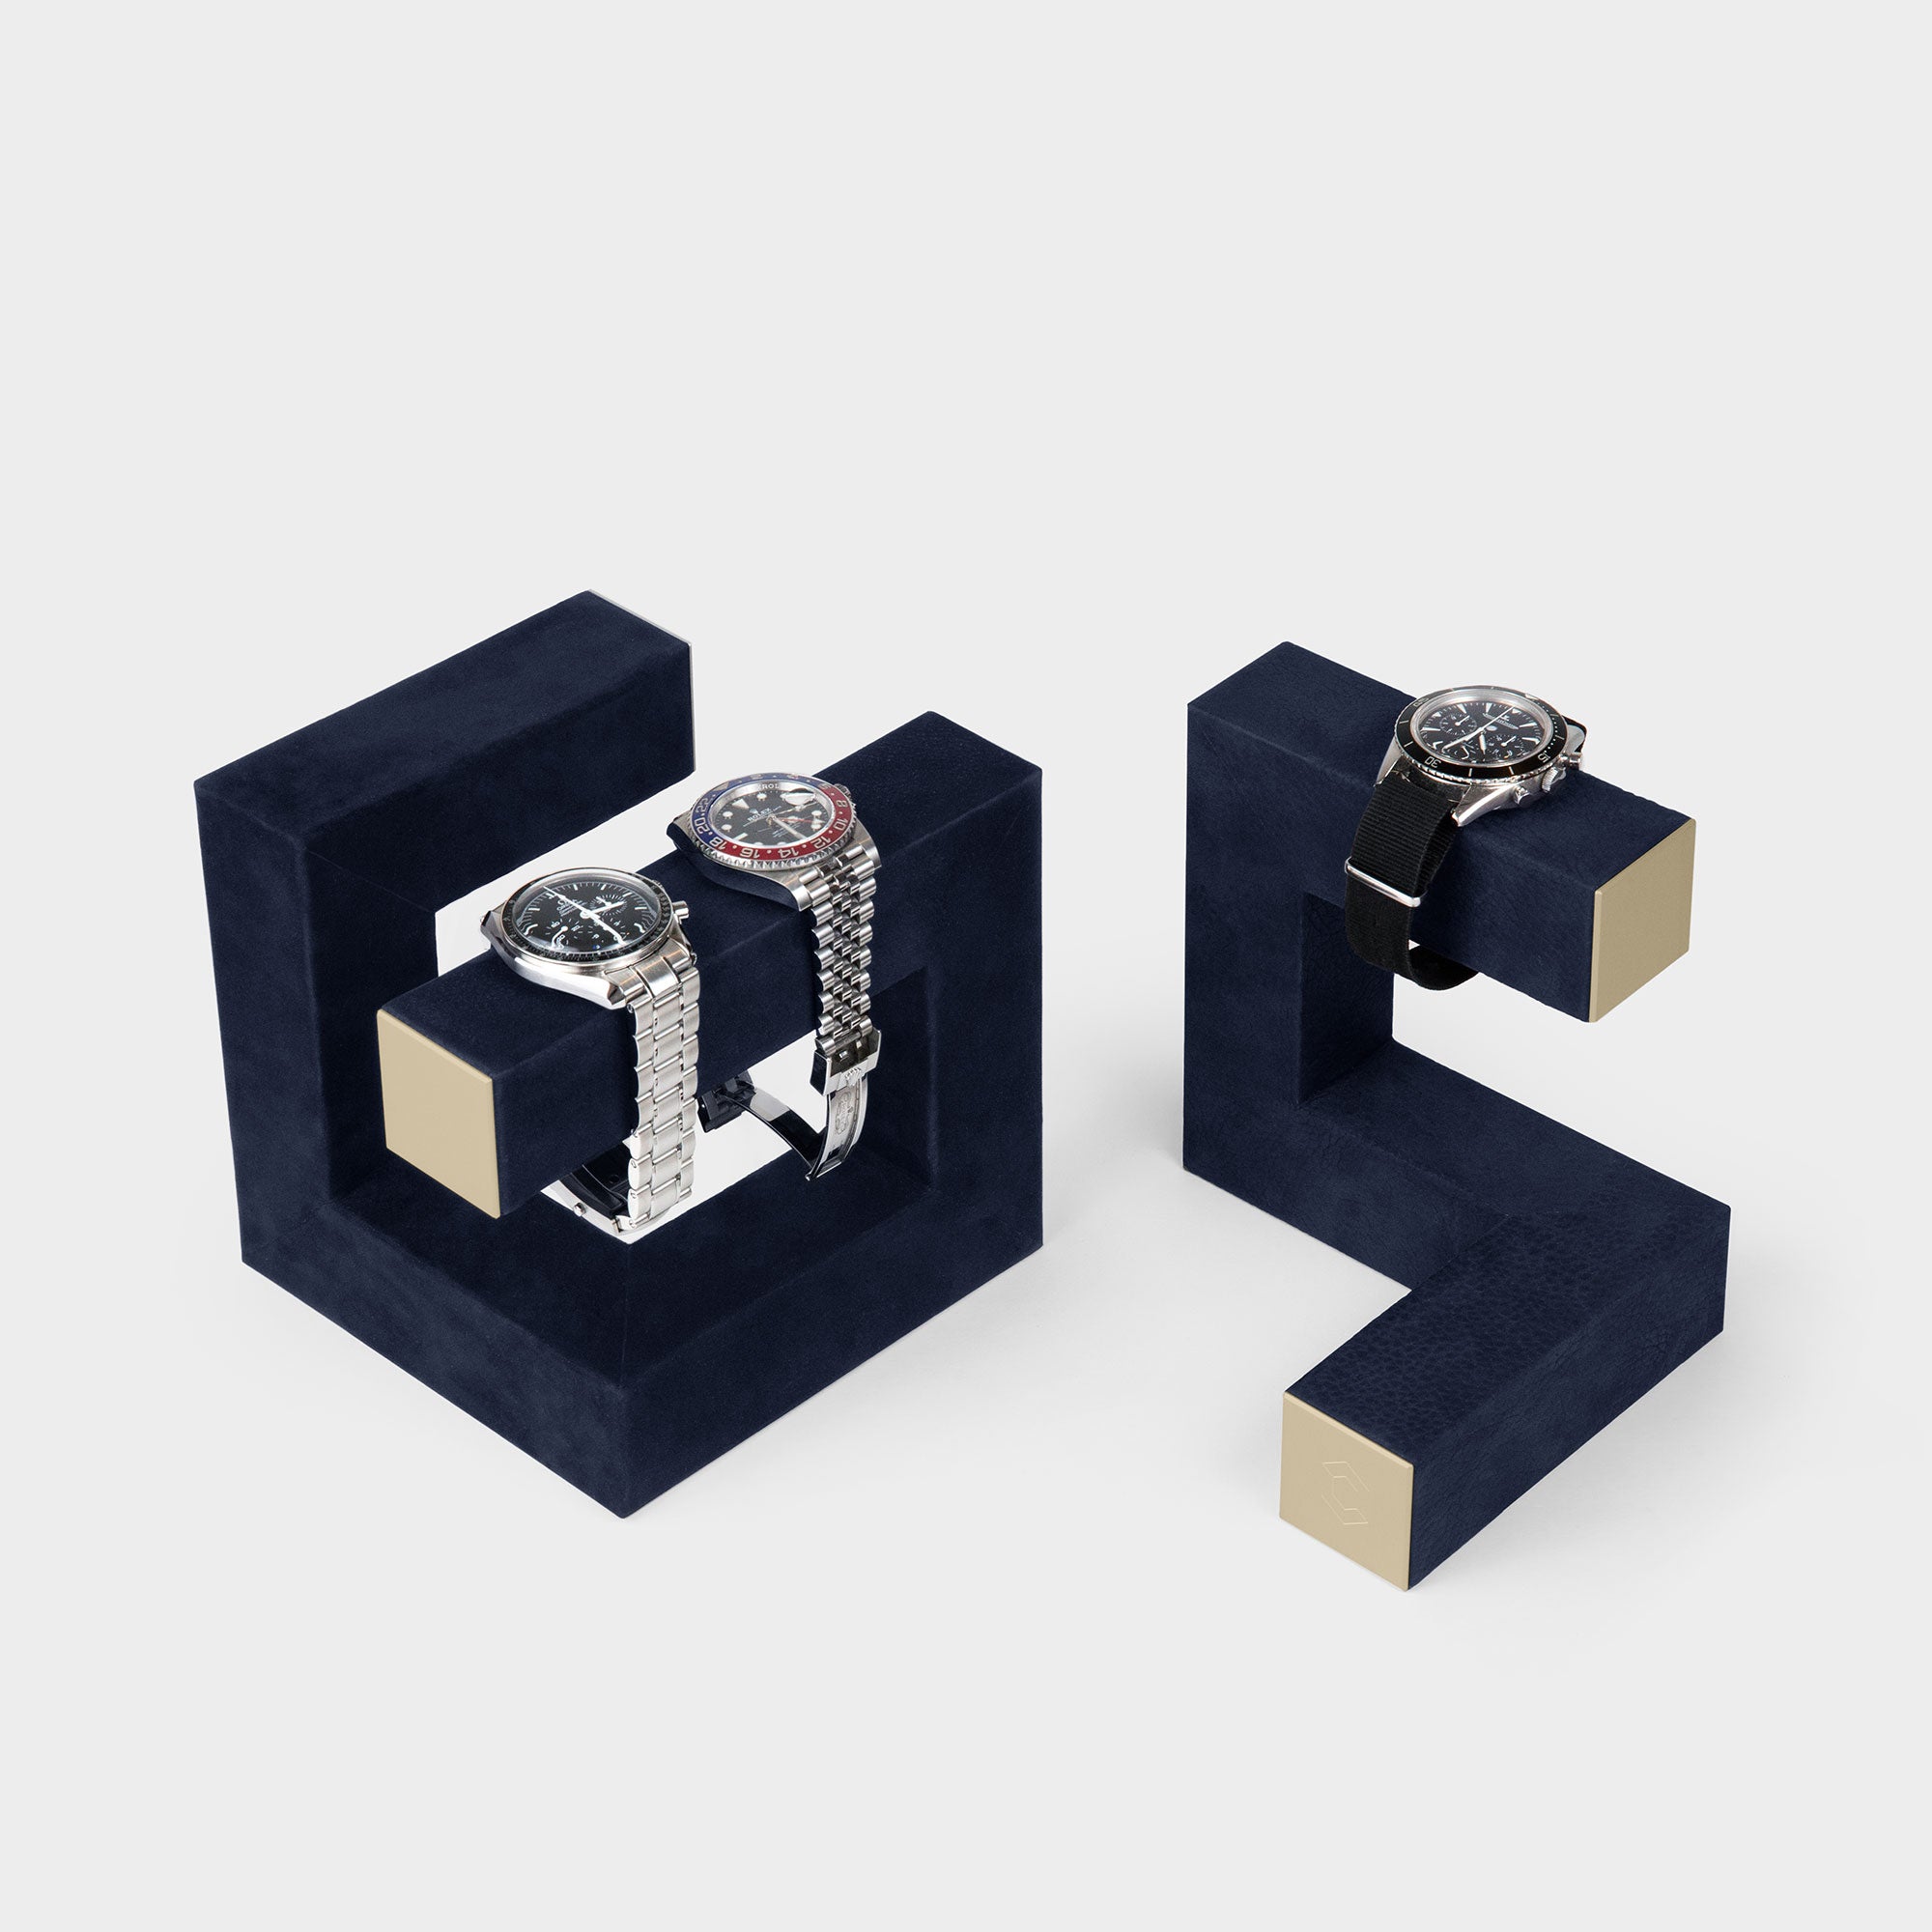 Product photo of Hudson Duo Watch stands in navy and gold displaying watches